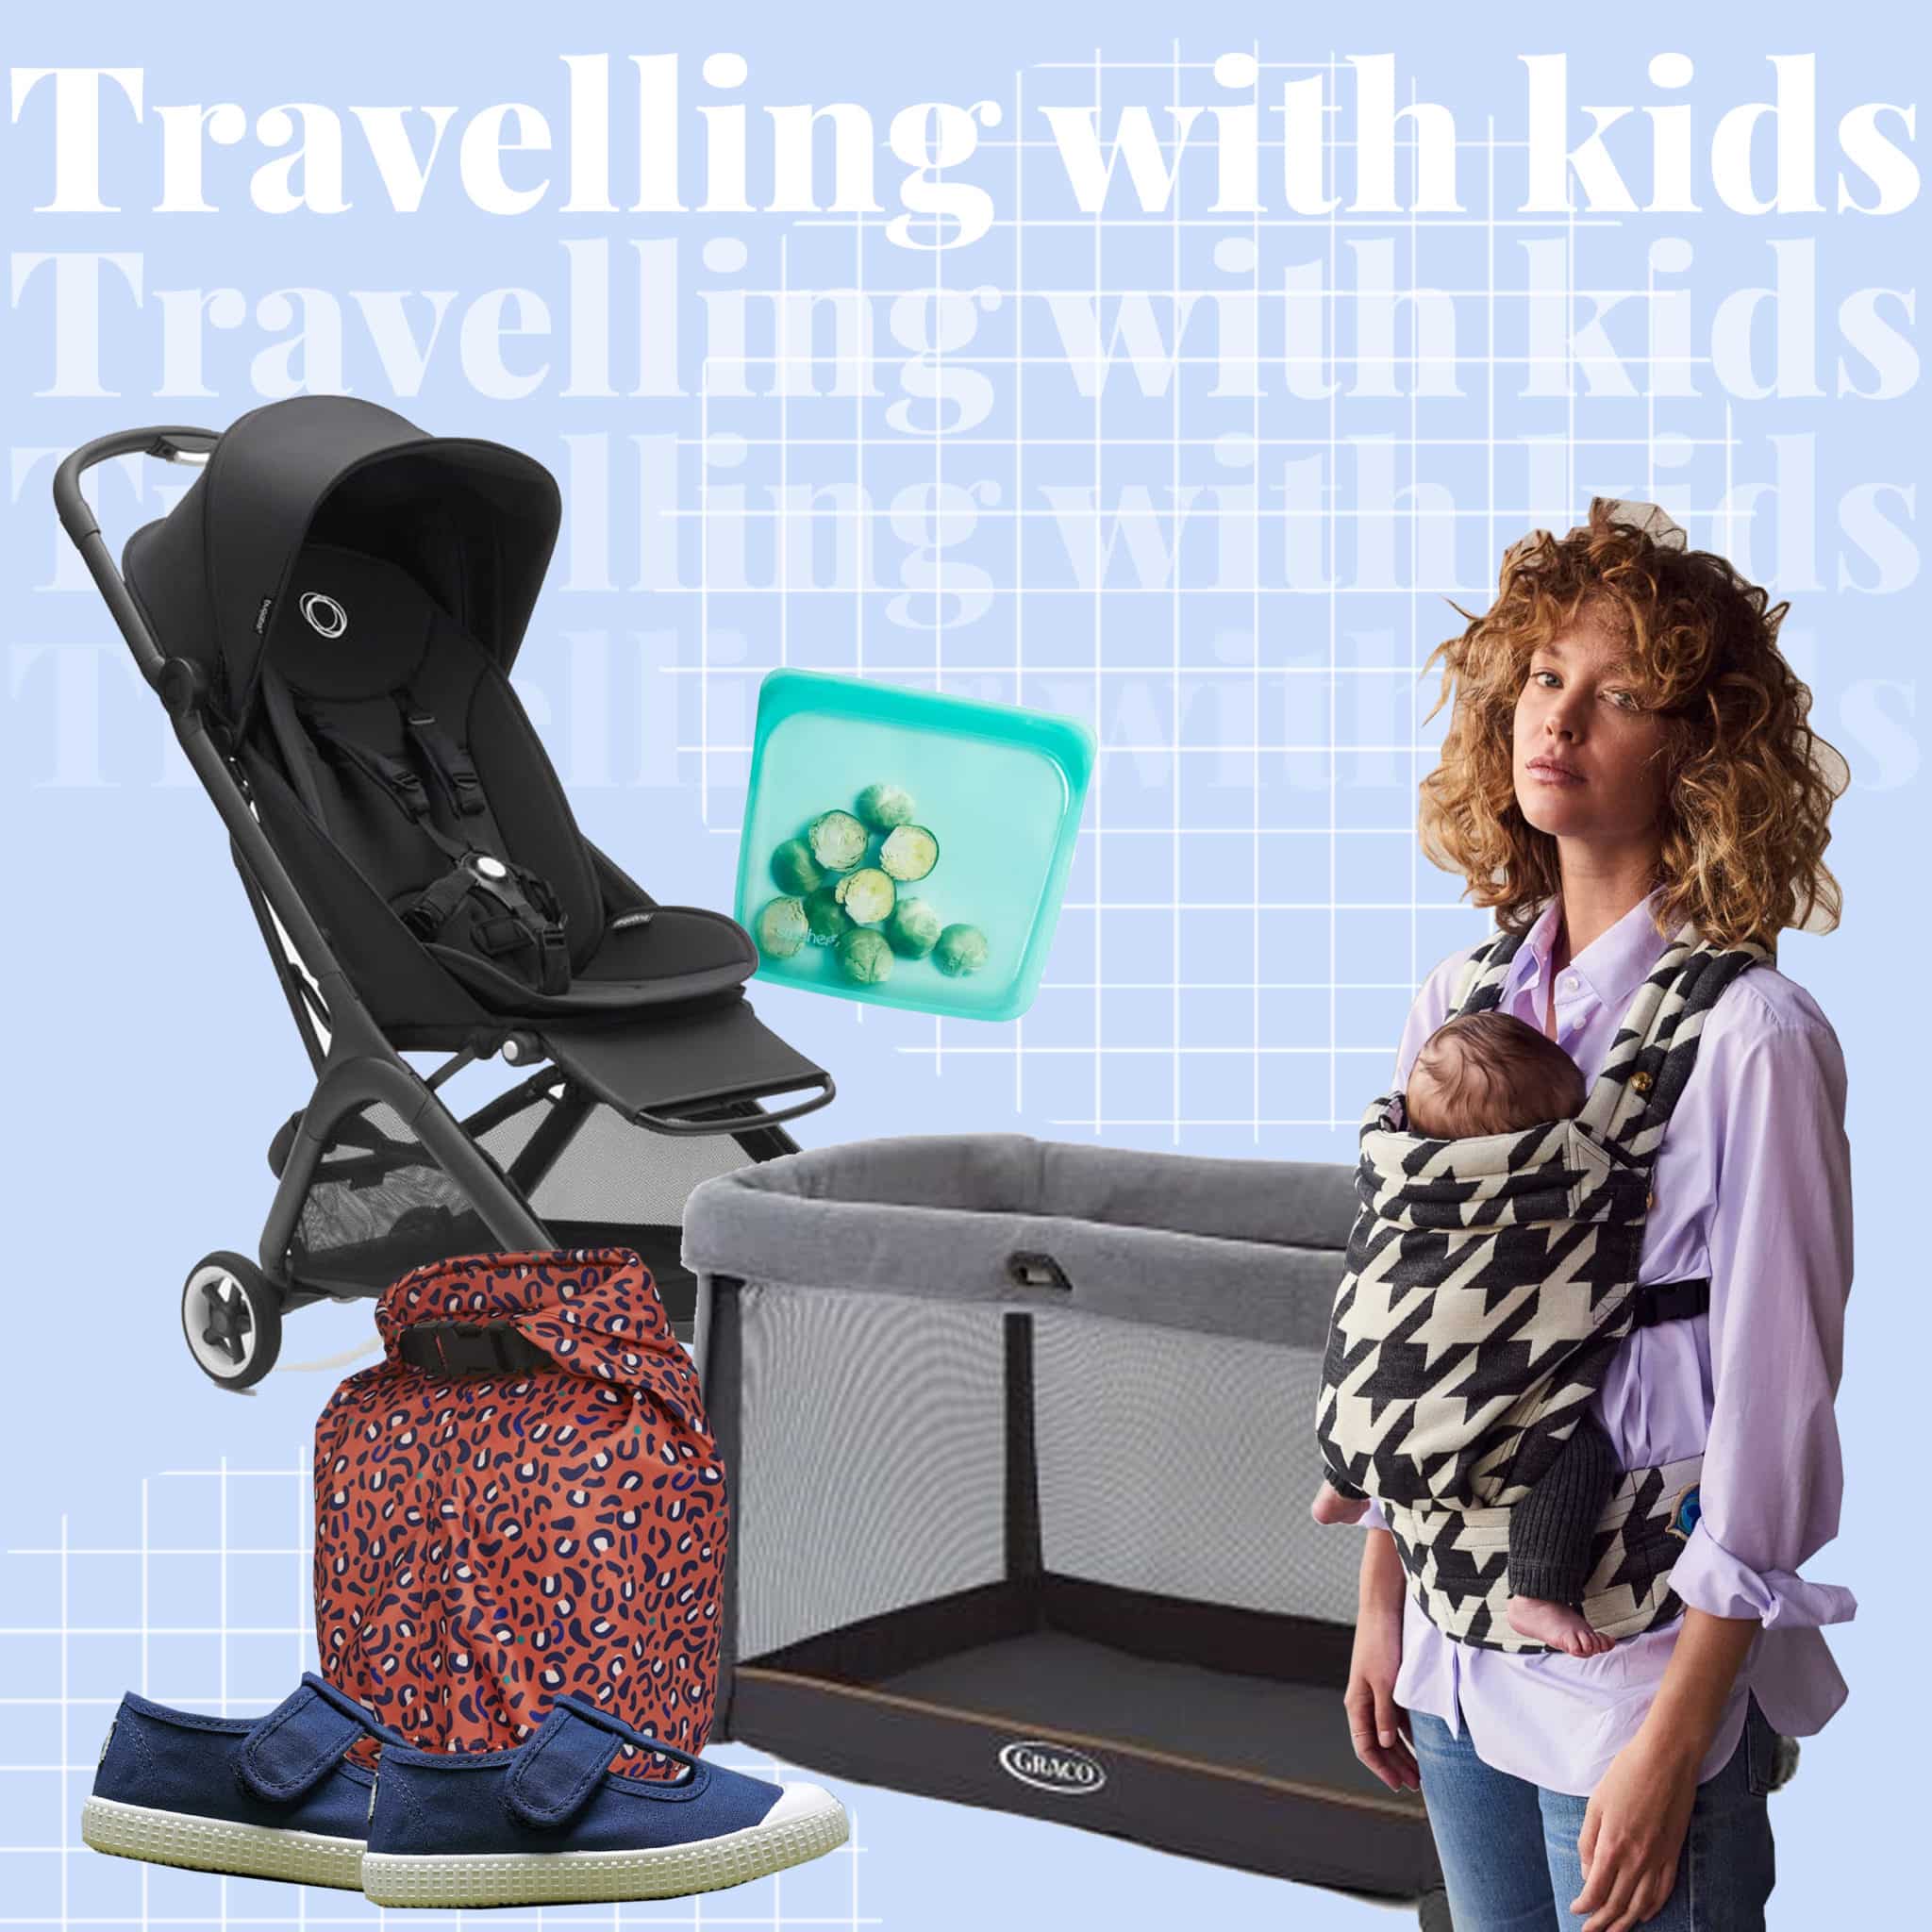 16 Products That Make Traveling With Kids A Little Bit Easier